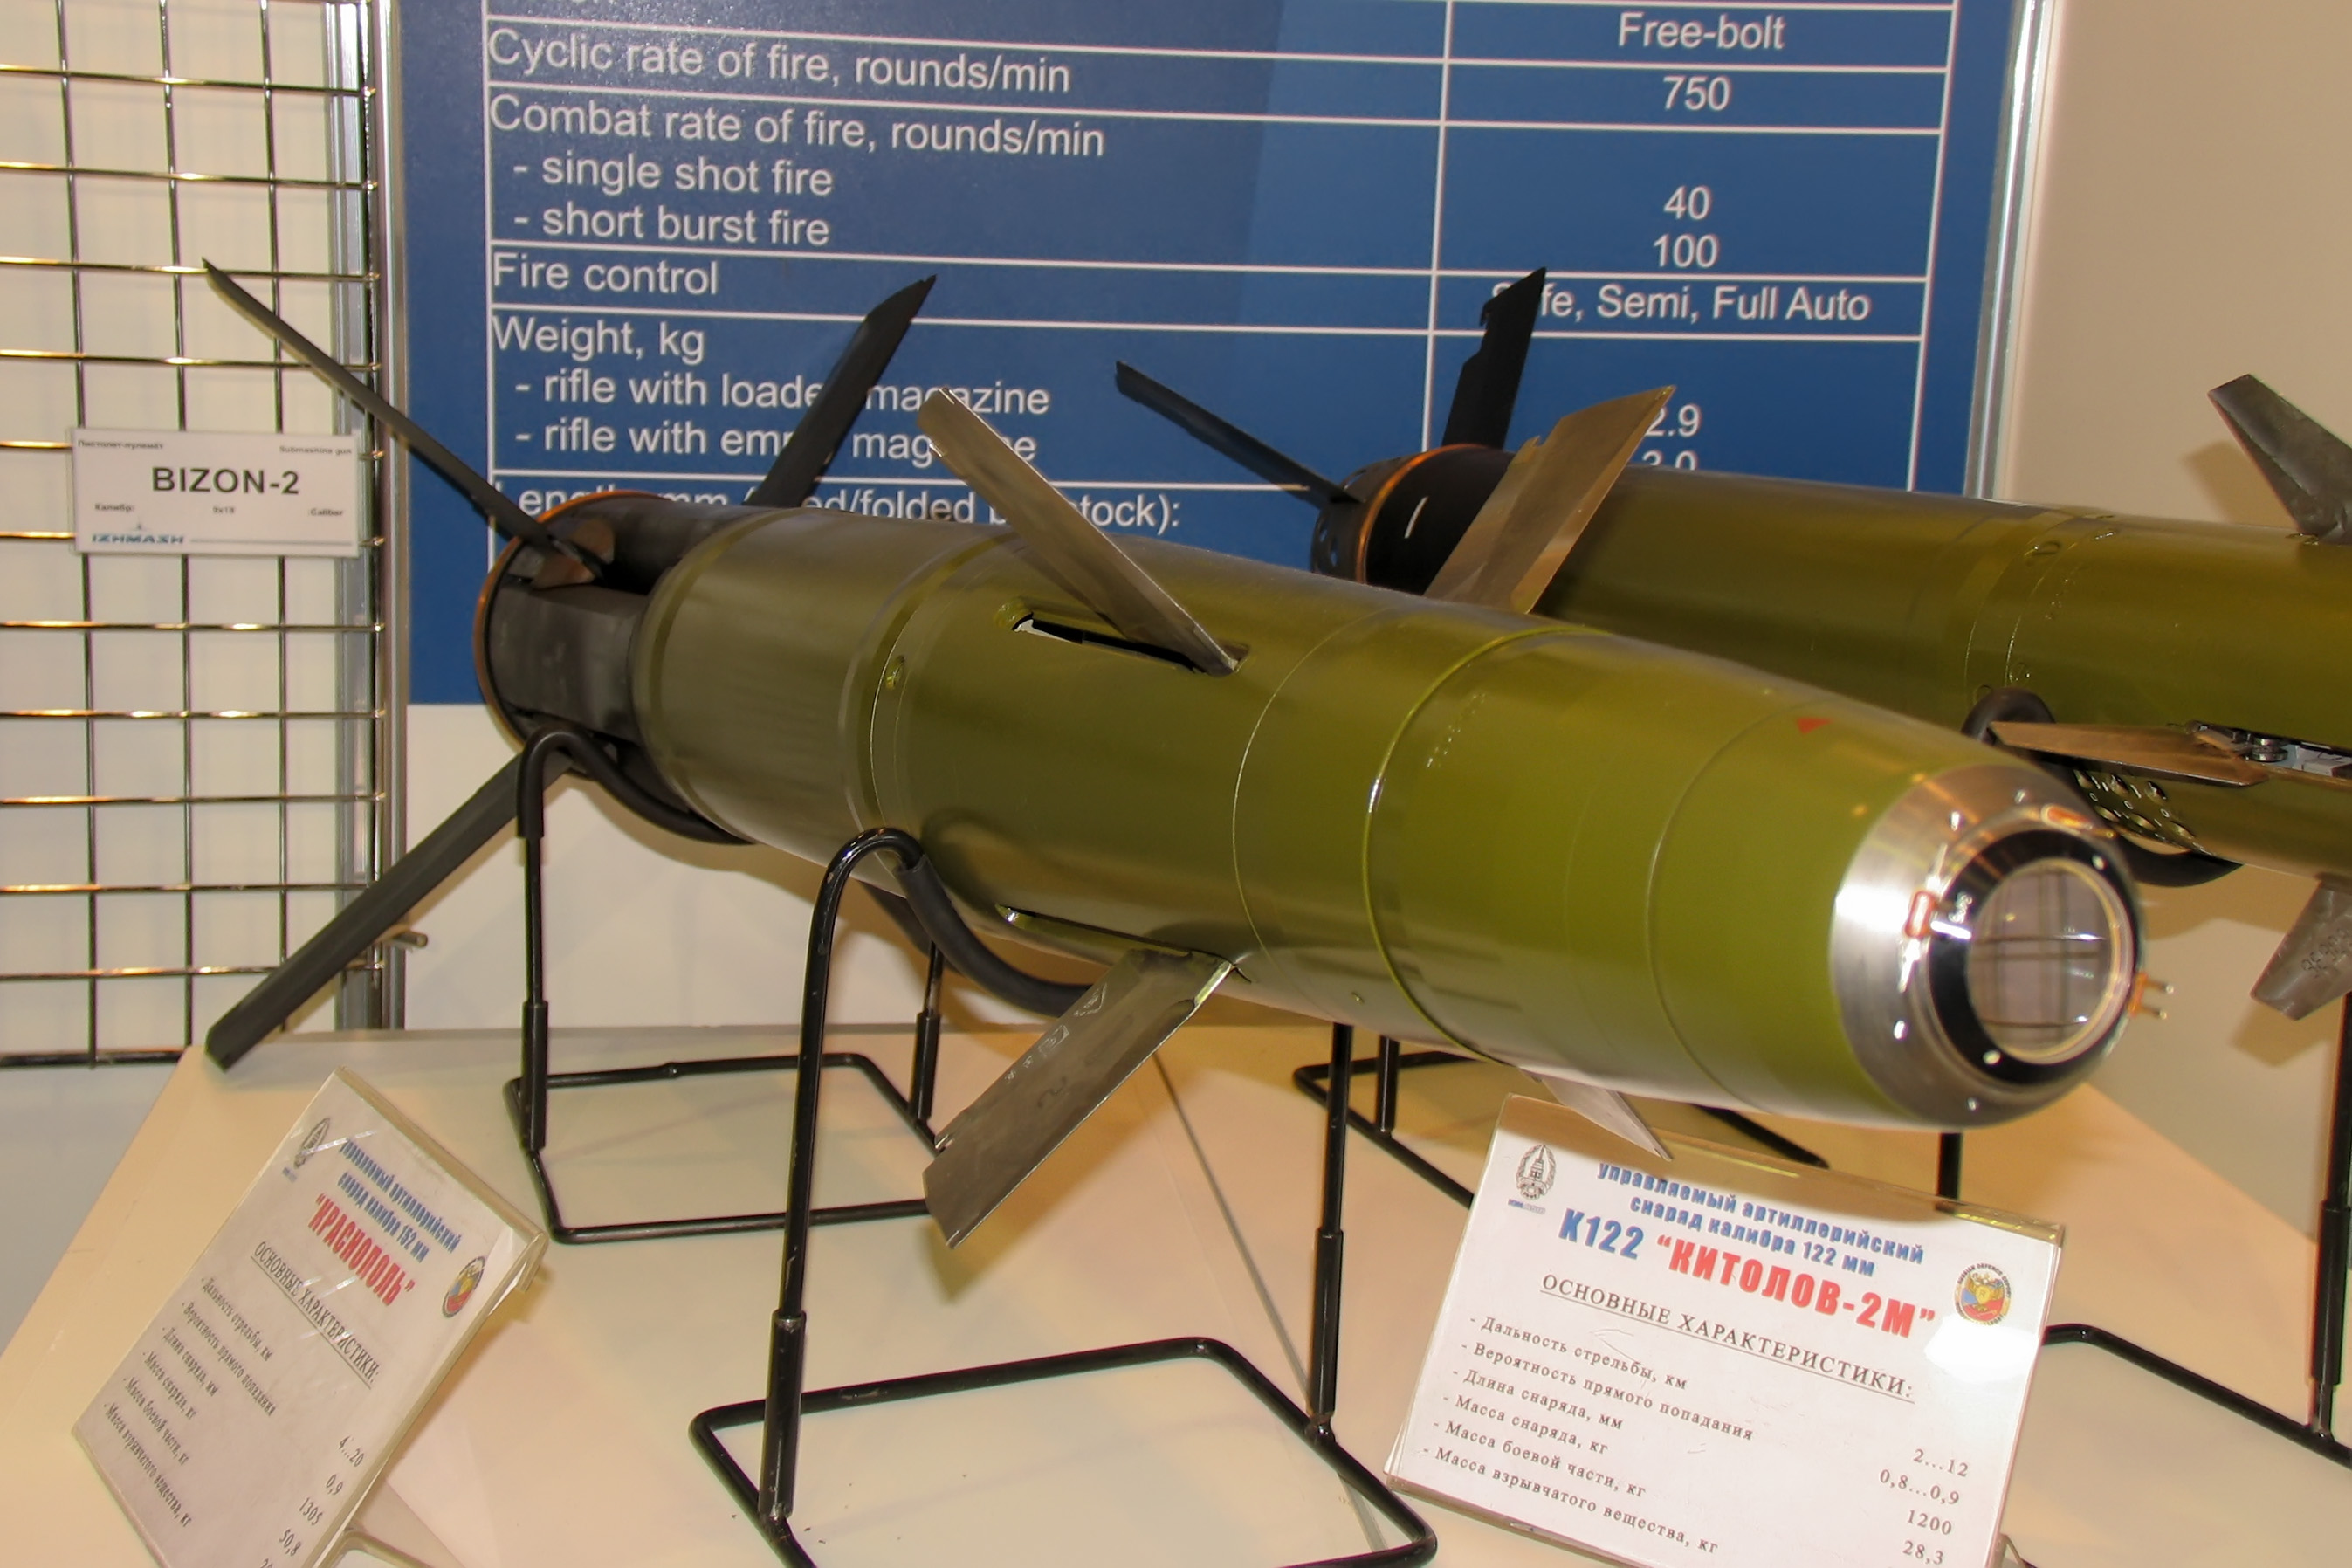 Russia Increased Production Of Guided Krasnopol Shells That Can Destroy Western Tanks